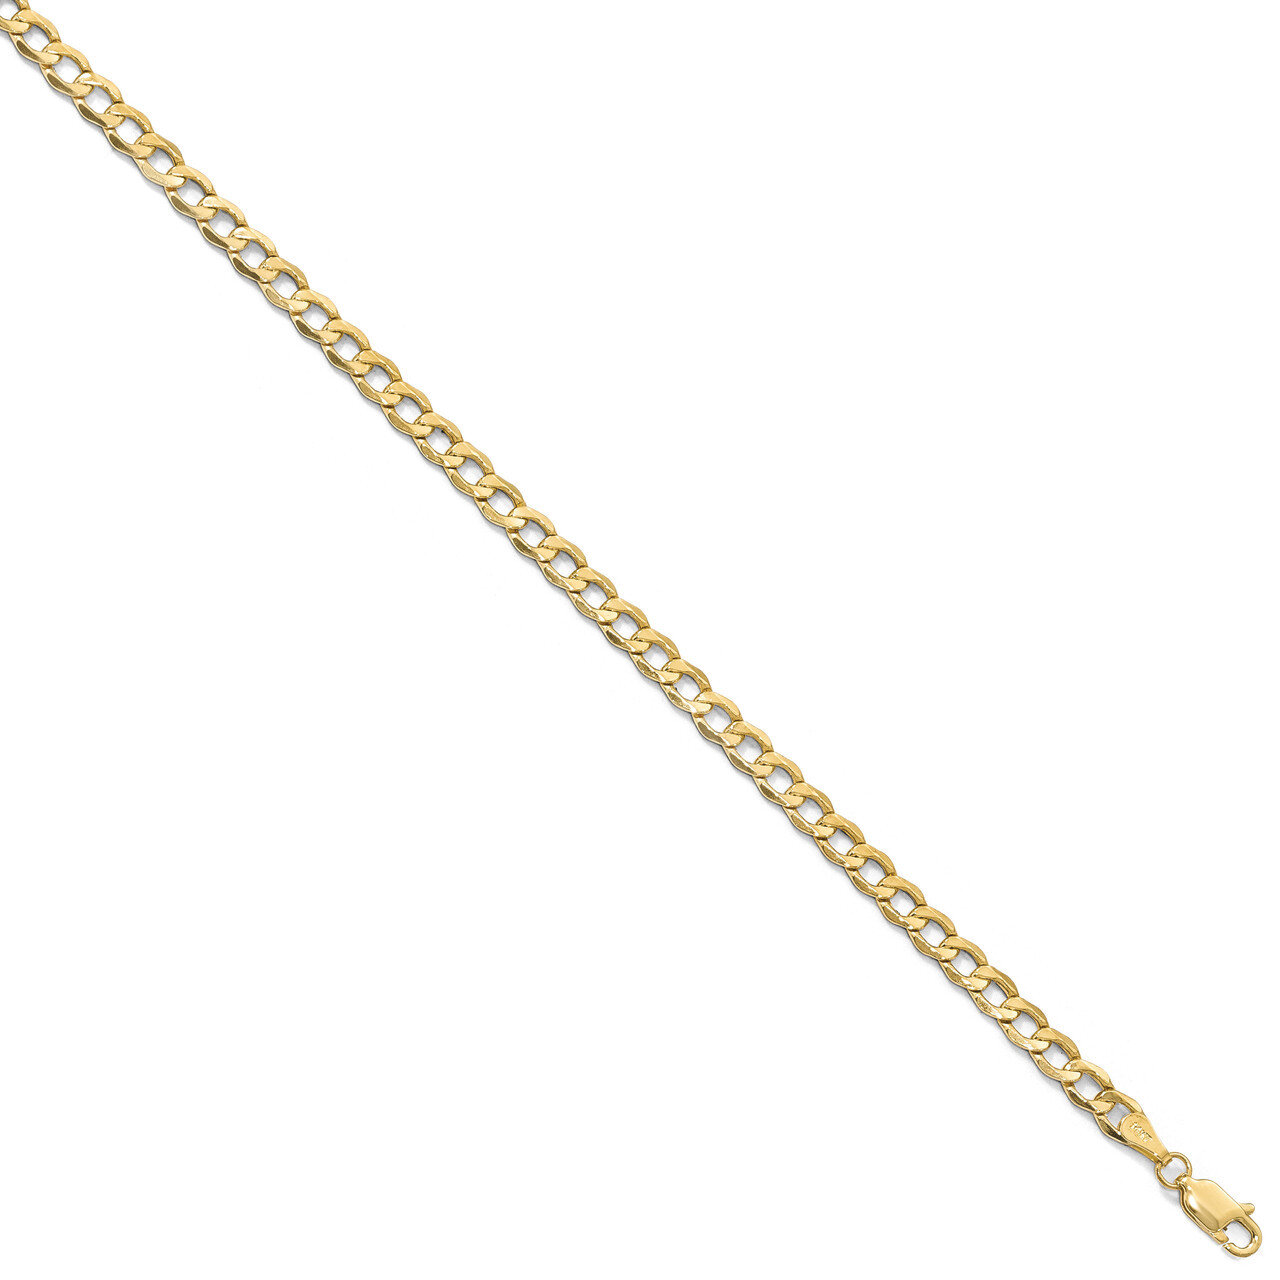 4.3mm Semi-Solid Curb Link Chain 7 Inch 10k Gold HB-8240-7